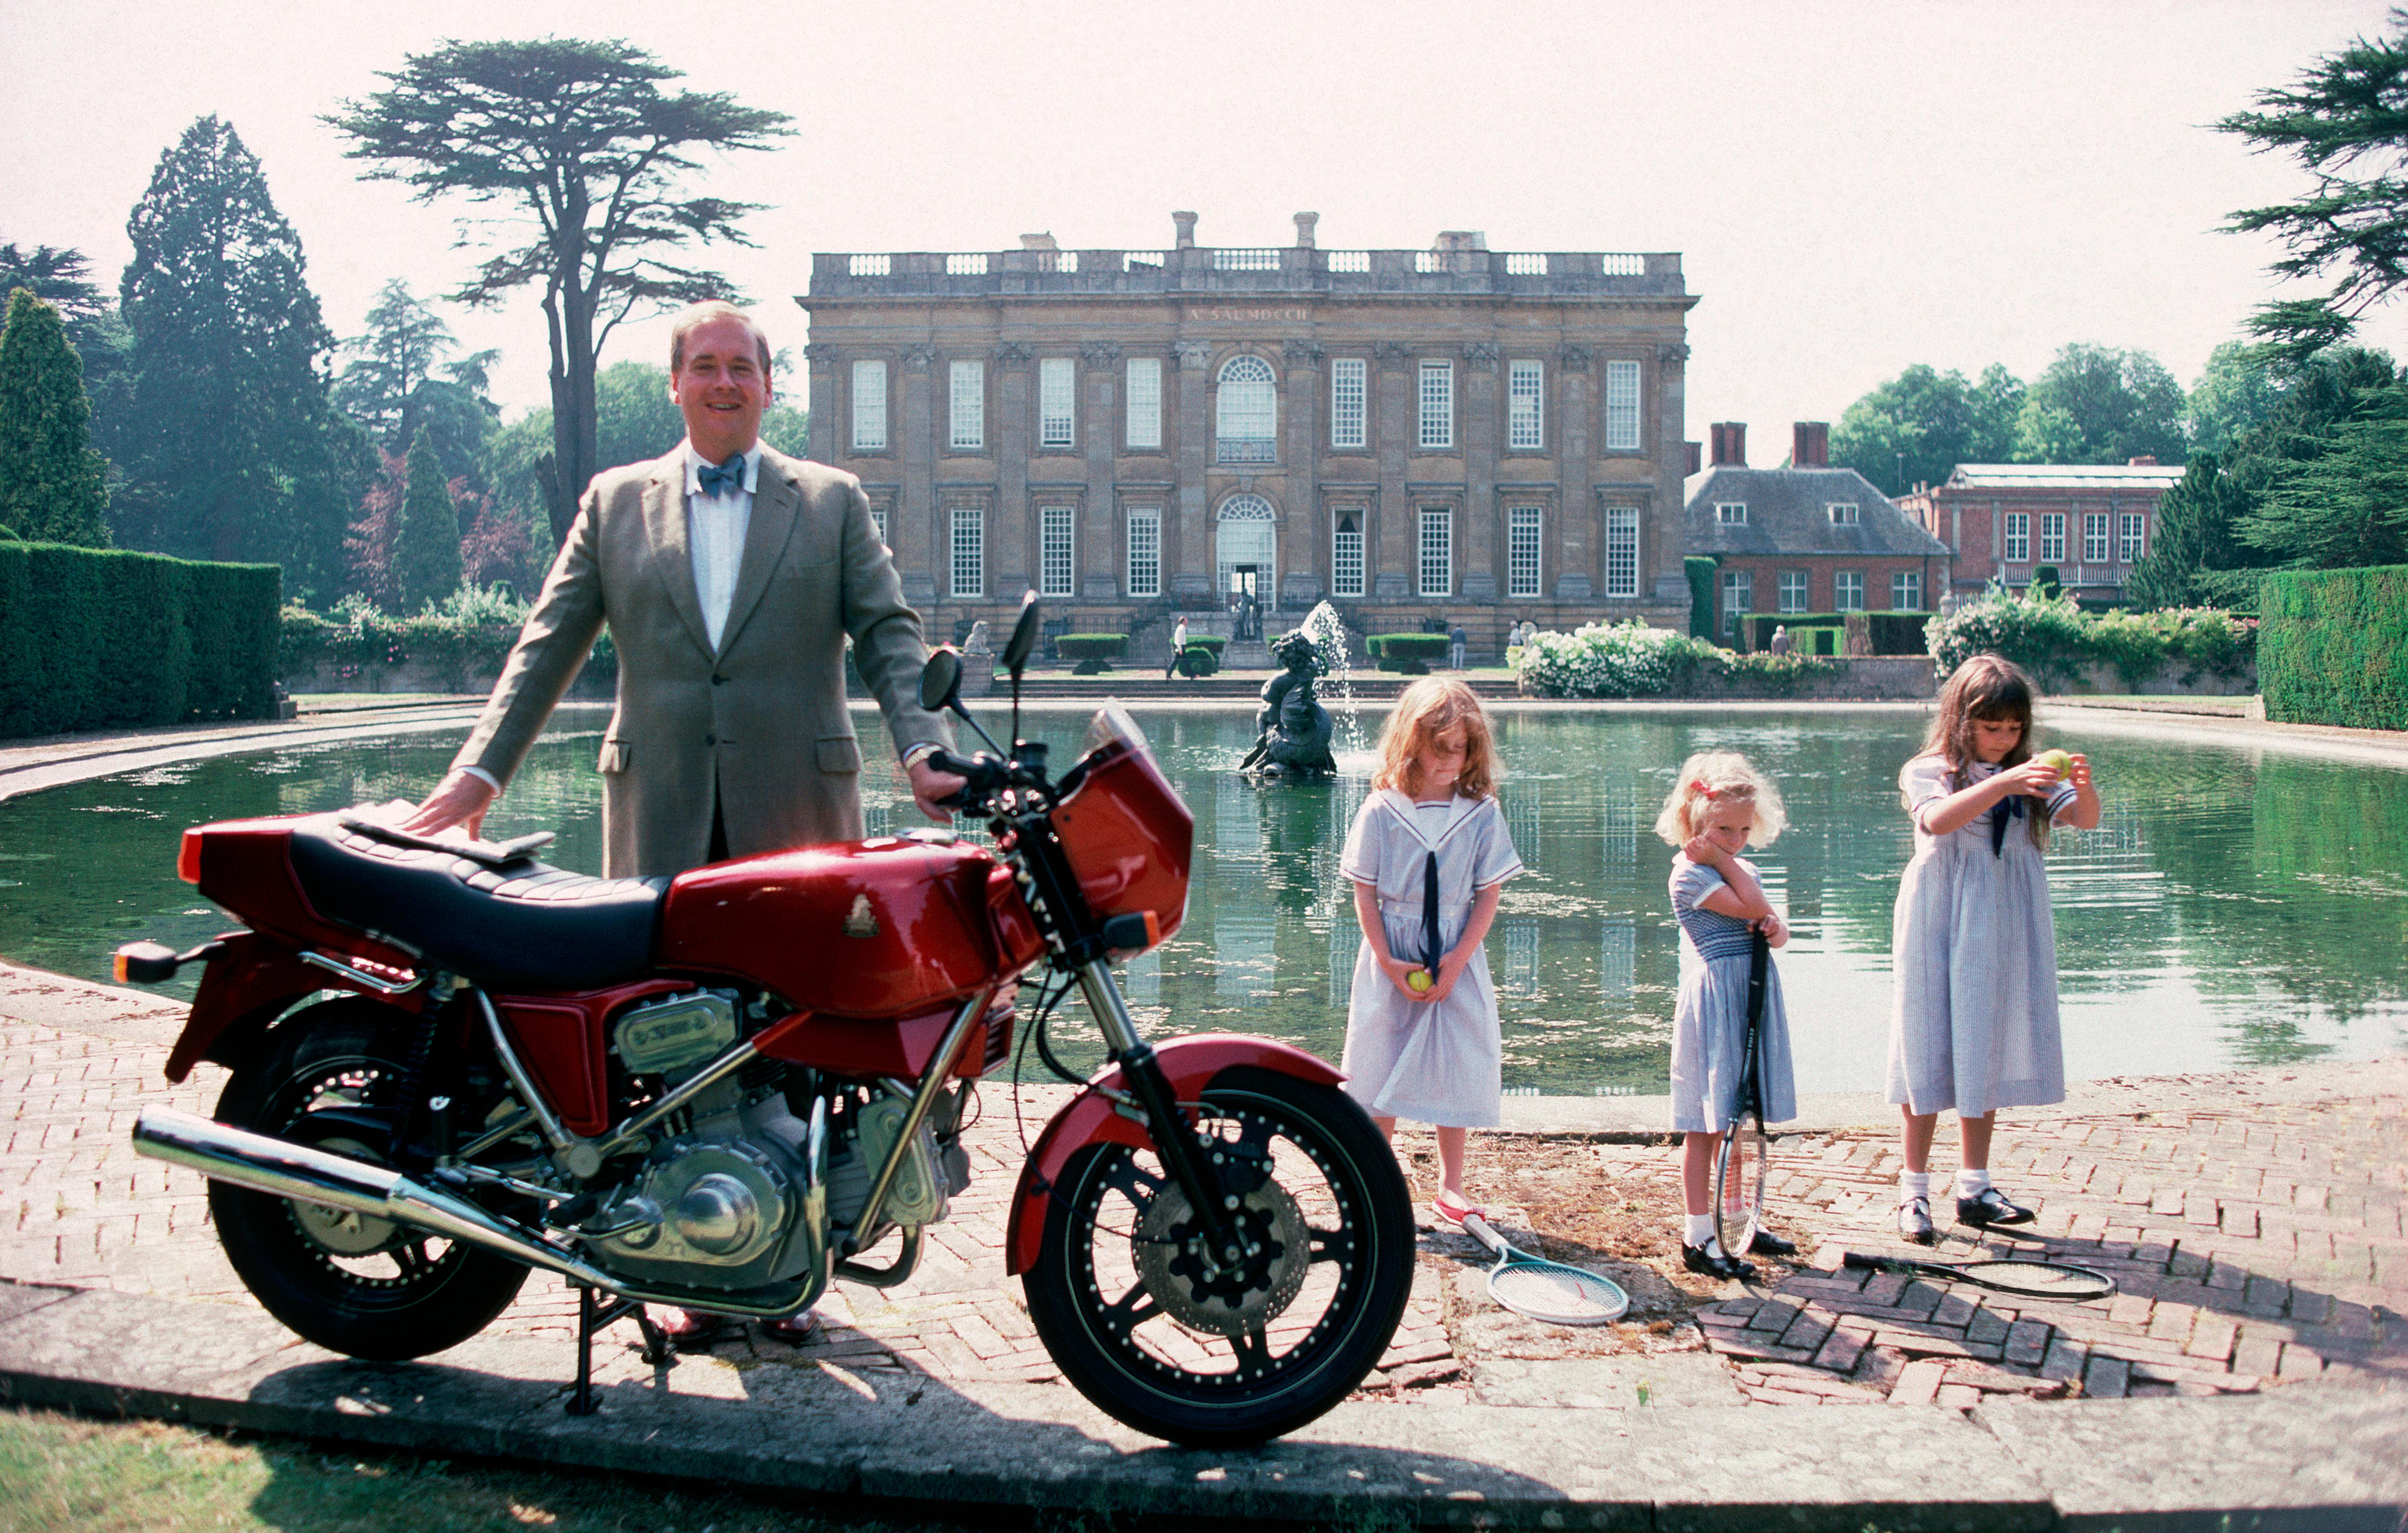 'Motorcycling Lord' 1990 Slim Aarons Limited Estate Edition

1990: Lord Hesketh, Minister of State at the Department of Trade and Industry, by the lake in the grounds of his family estate Easton Neston House, Northamptonshire with his motorbike, a